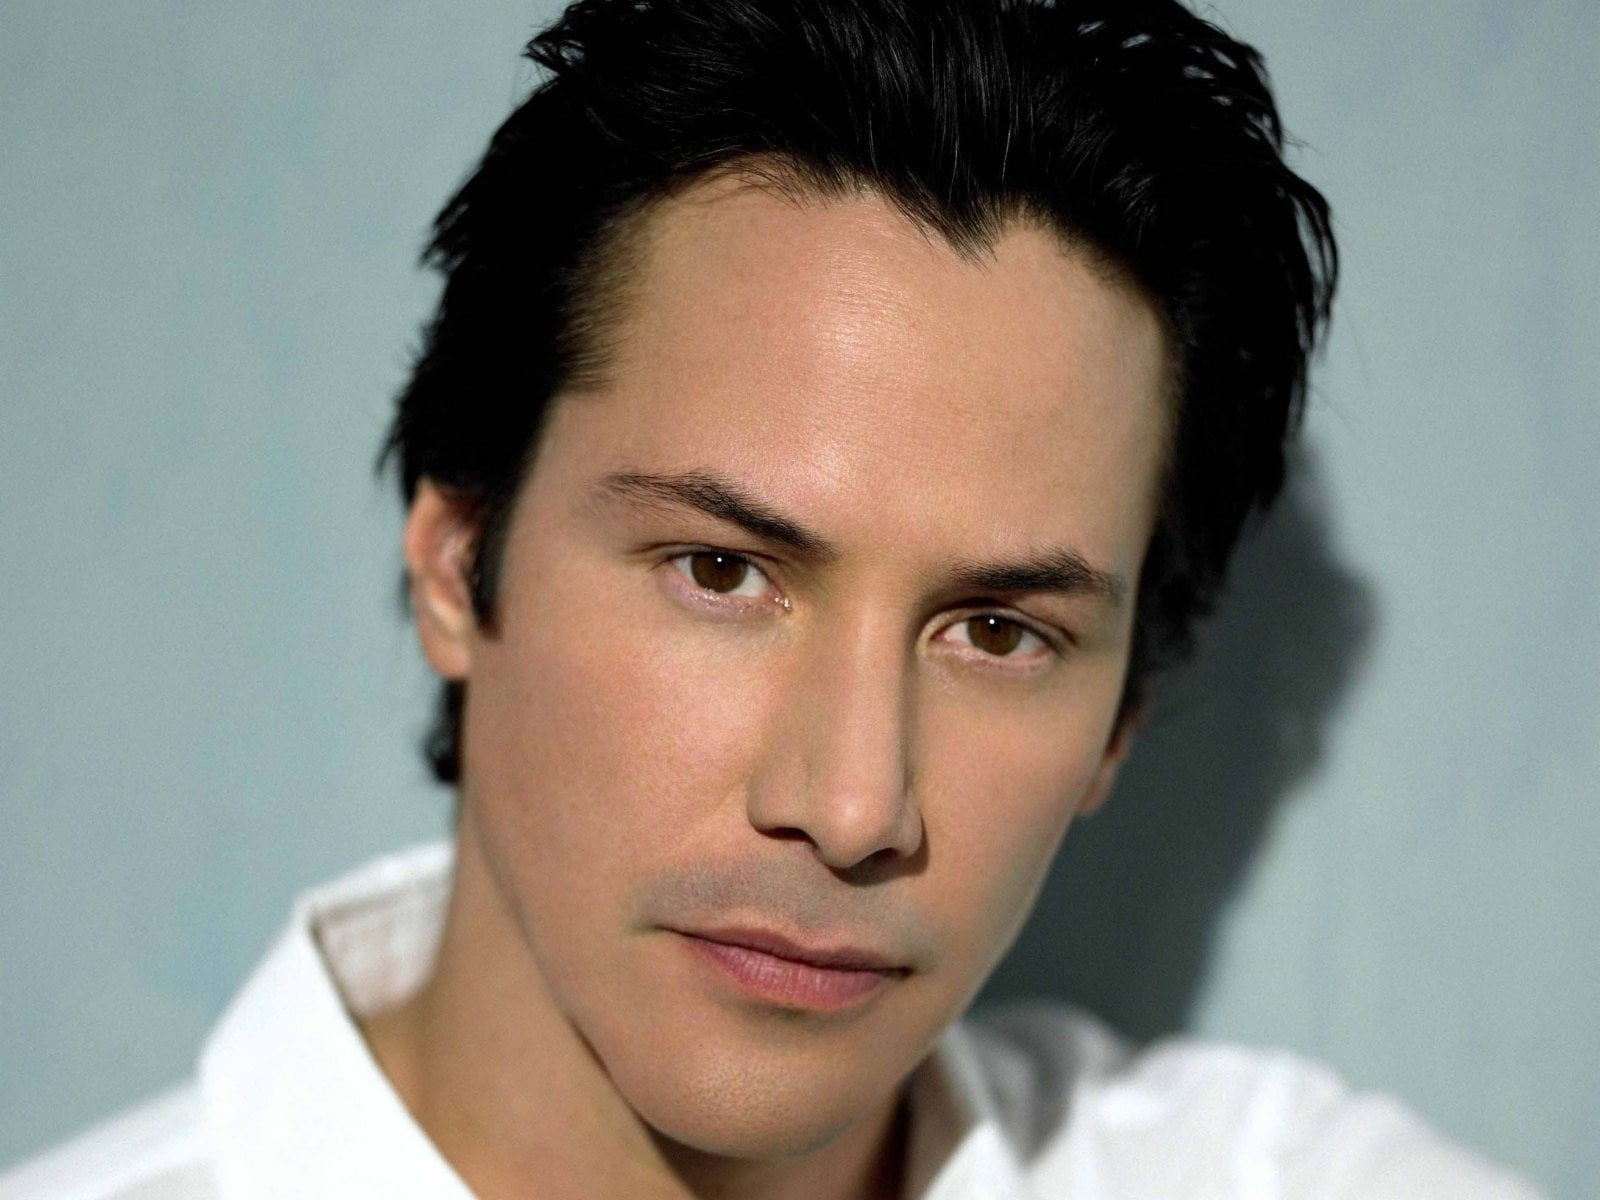 Actors, Keanu Reeves, portrait, headshot, one person, young adult